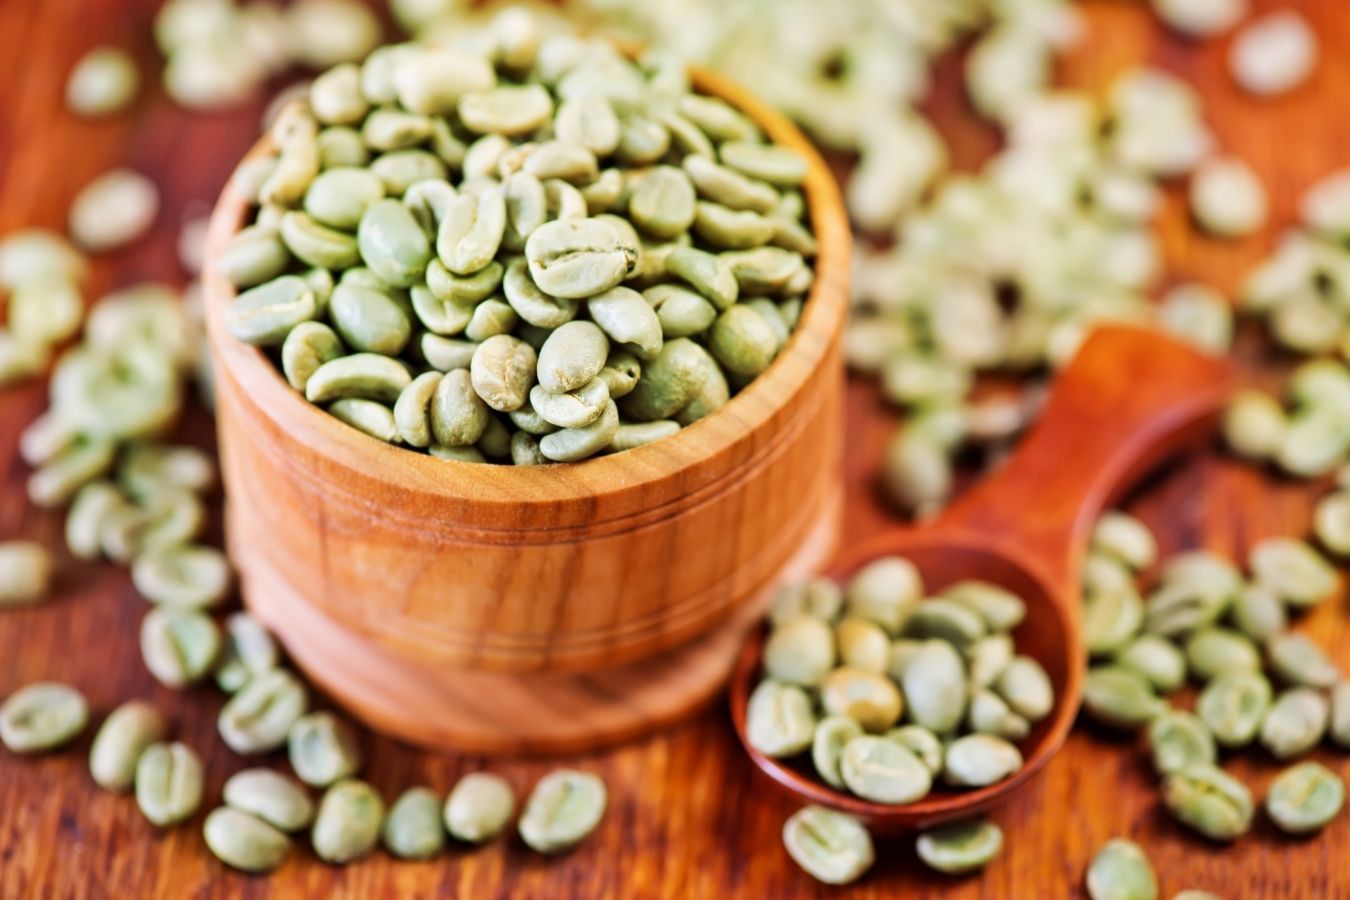 How To Store Green Coffee Beans